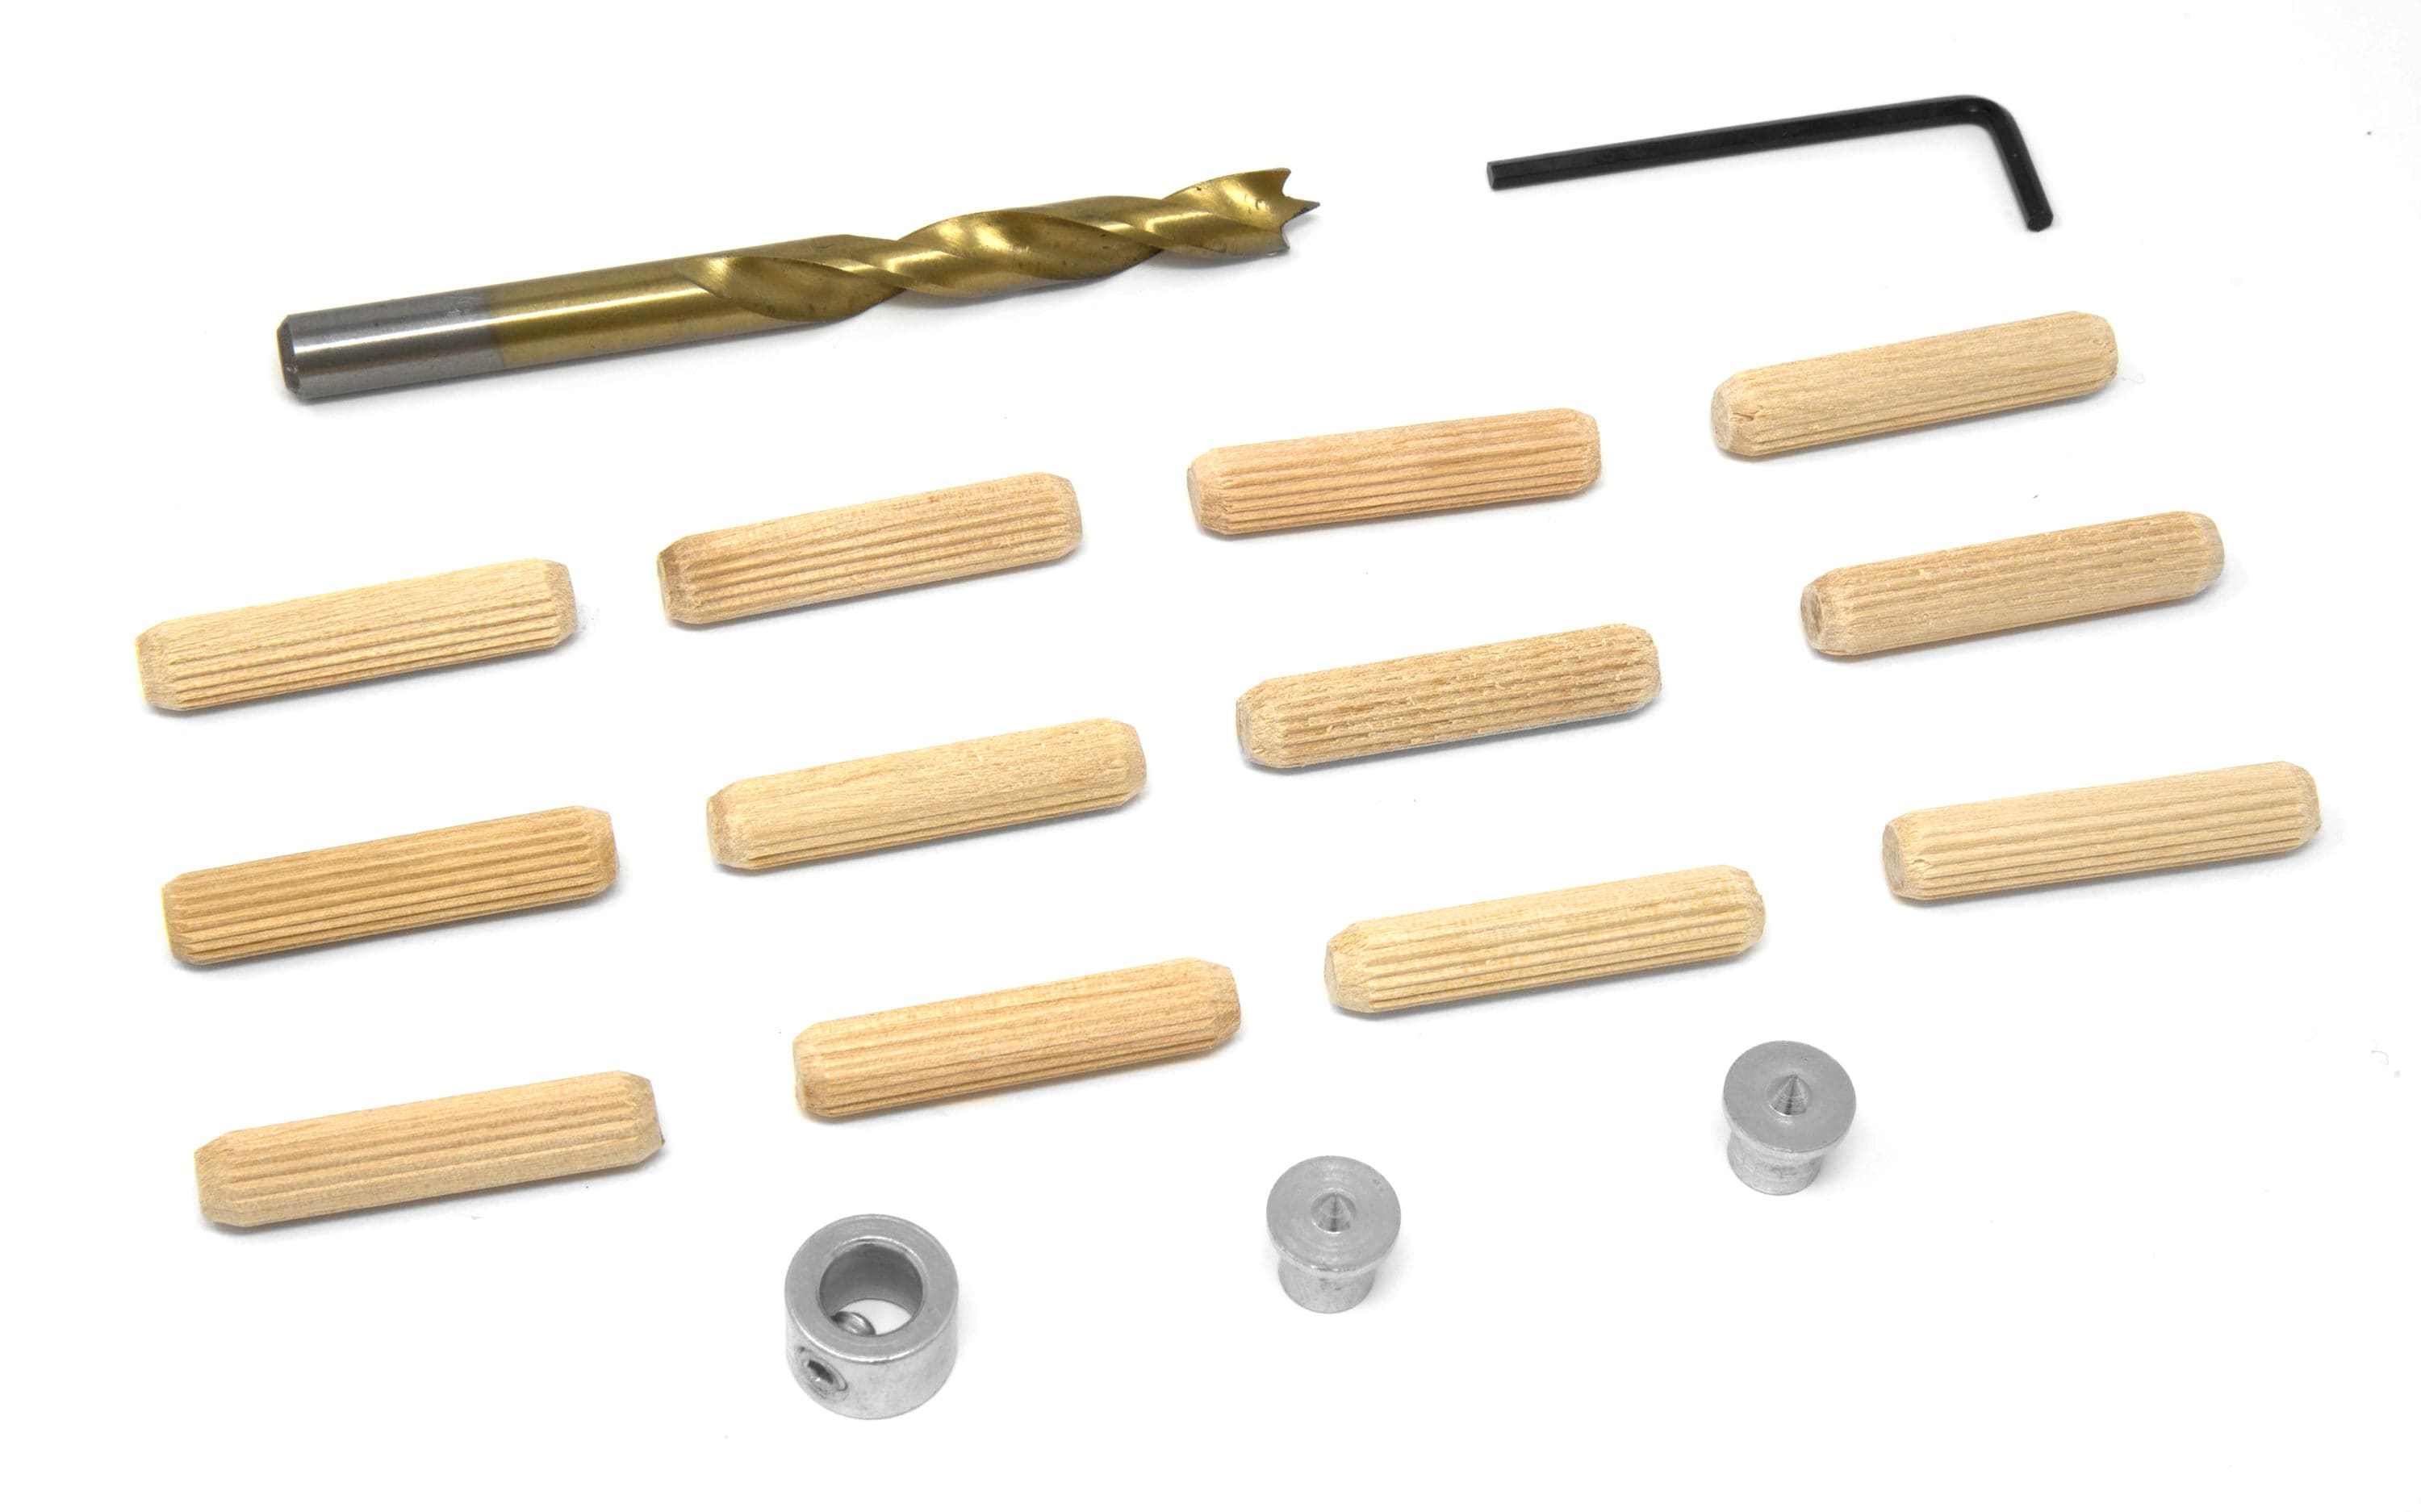 5/16 in 100 Pack 5/16 x 1-1/2 Wood Dowel Pins Straight Grooved Pins for Furniture Door and Dowel jig 